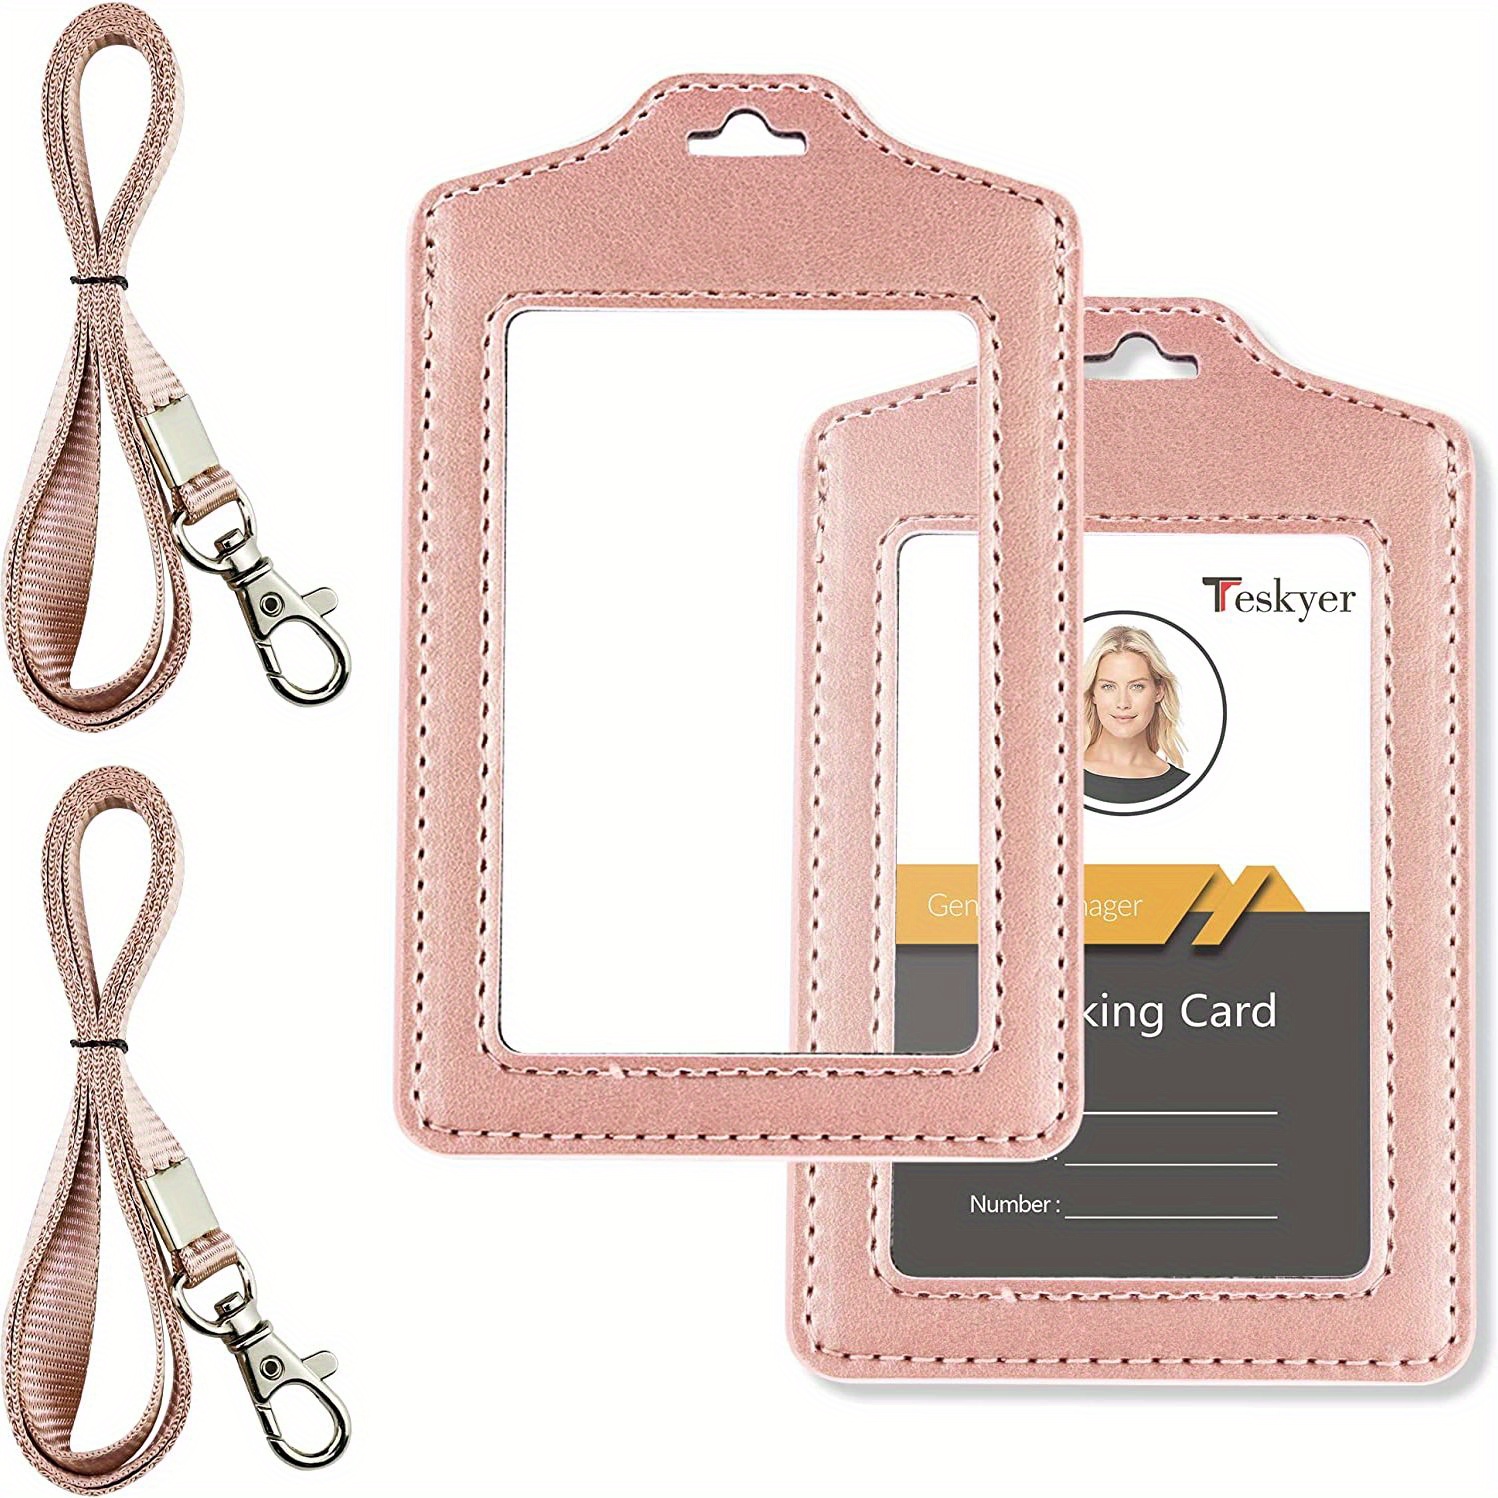 2Pack ID Badge Holder with Lanyards- Heavy Duty Clear ID Card Holder for  Lanyard - Black Lanyards wi…See more 2Pack ID Badge Holder with Lanyards